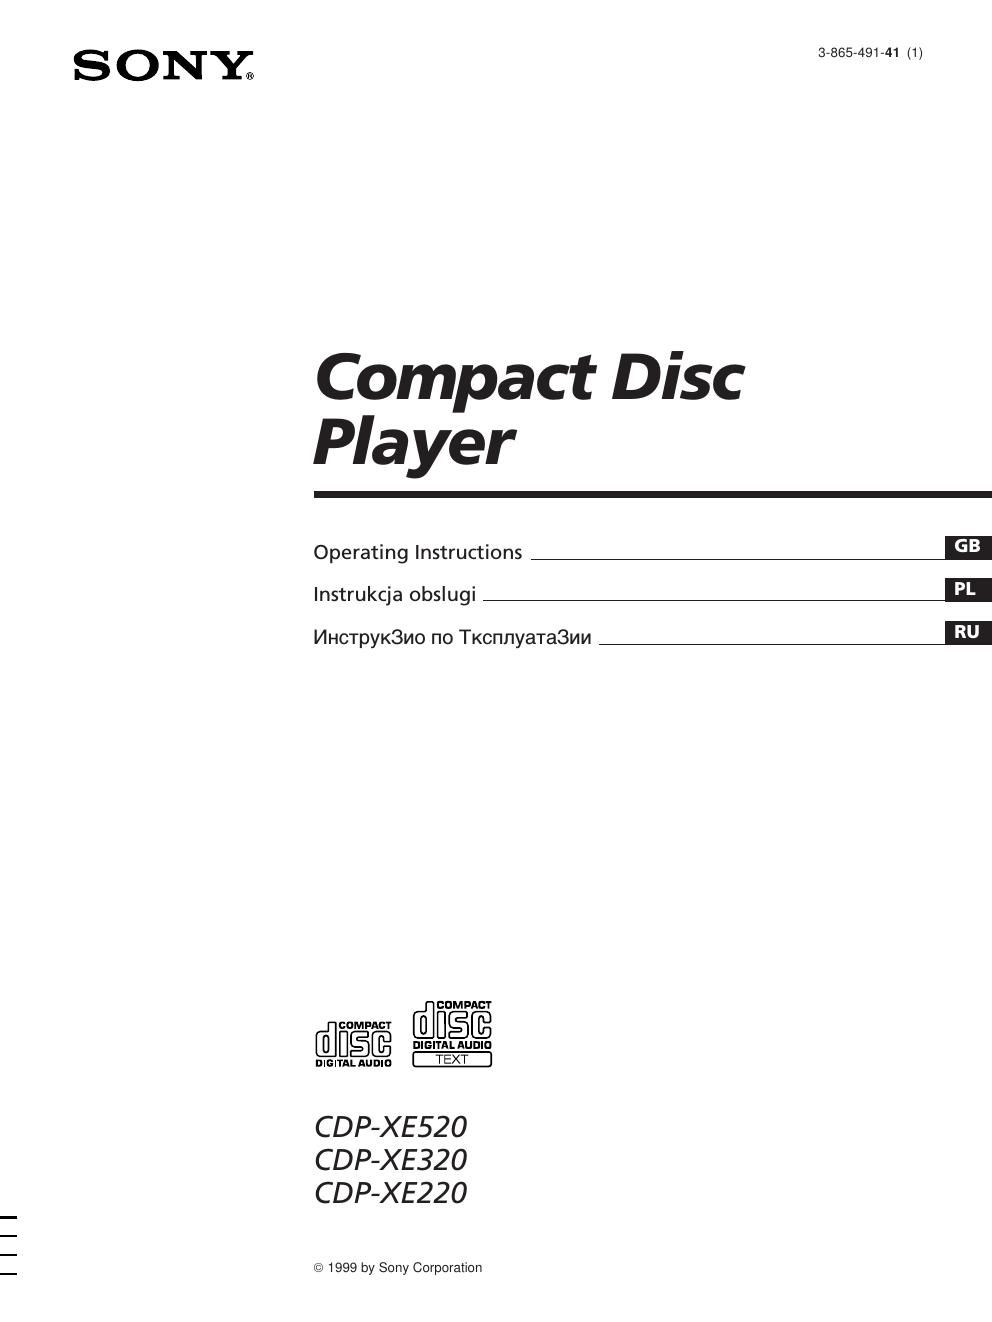 sony cdp xe 220 owners manual